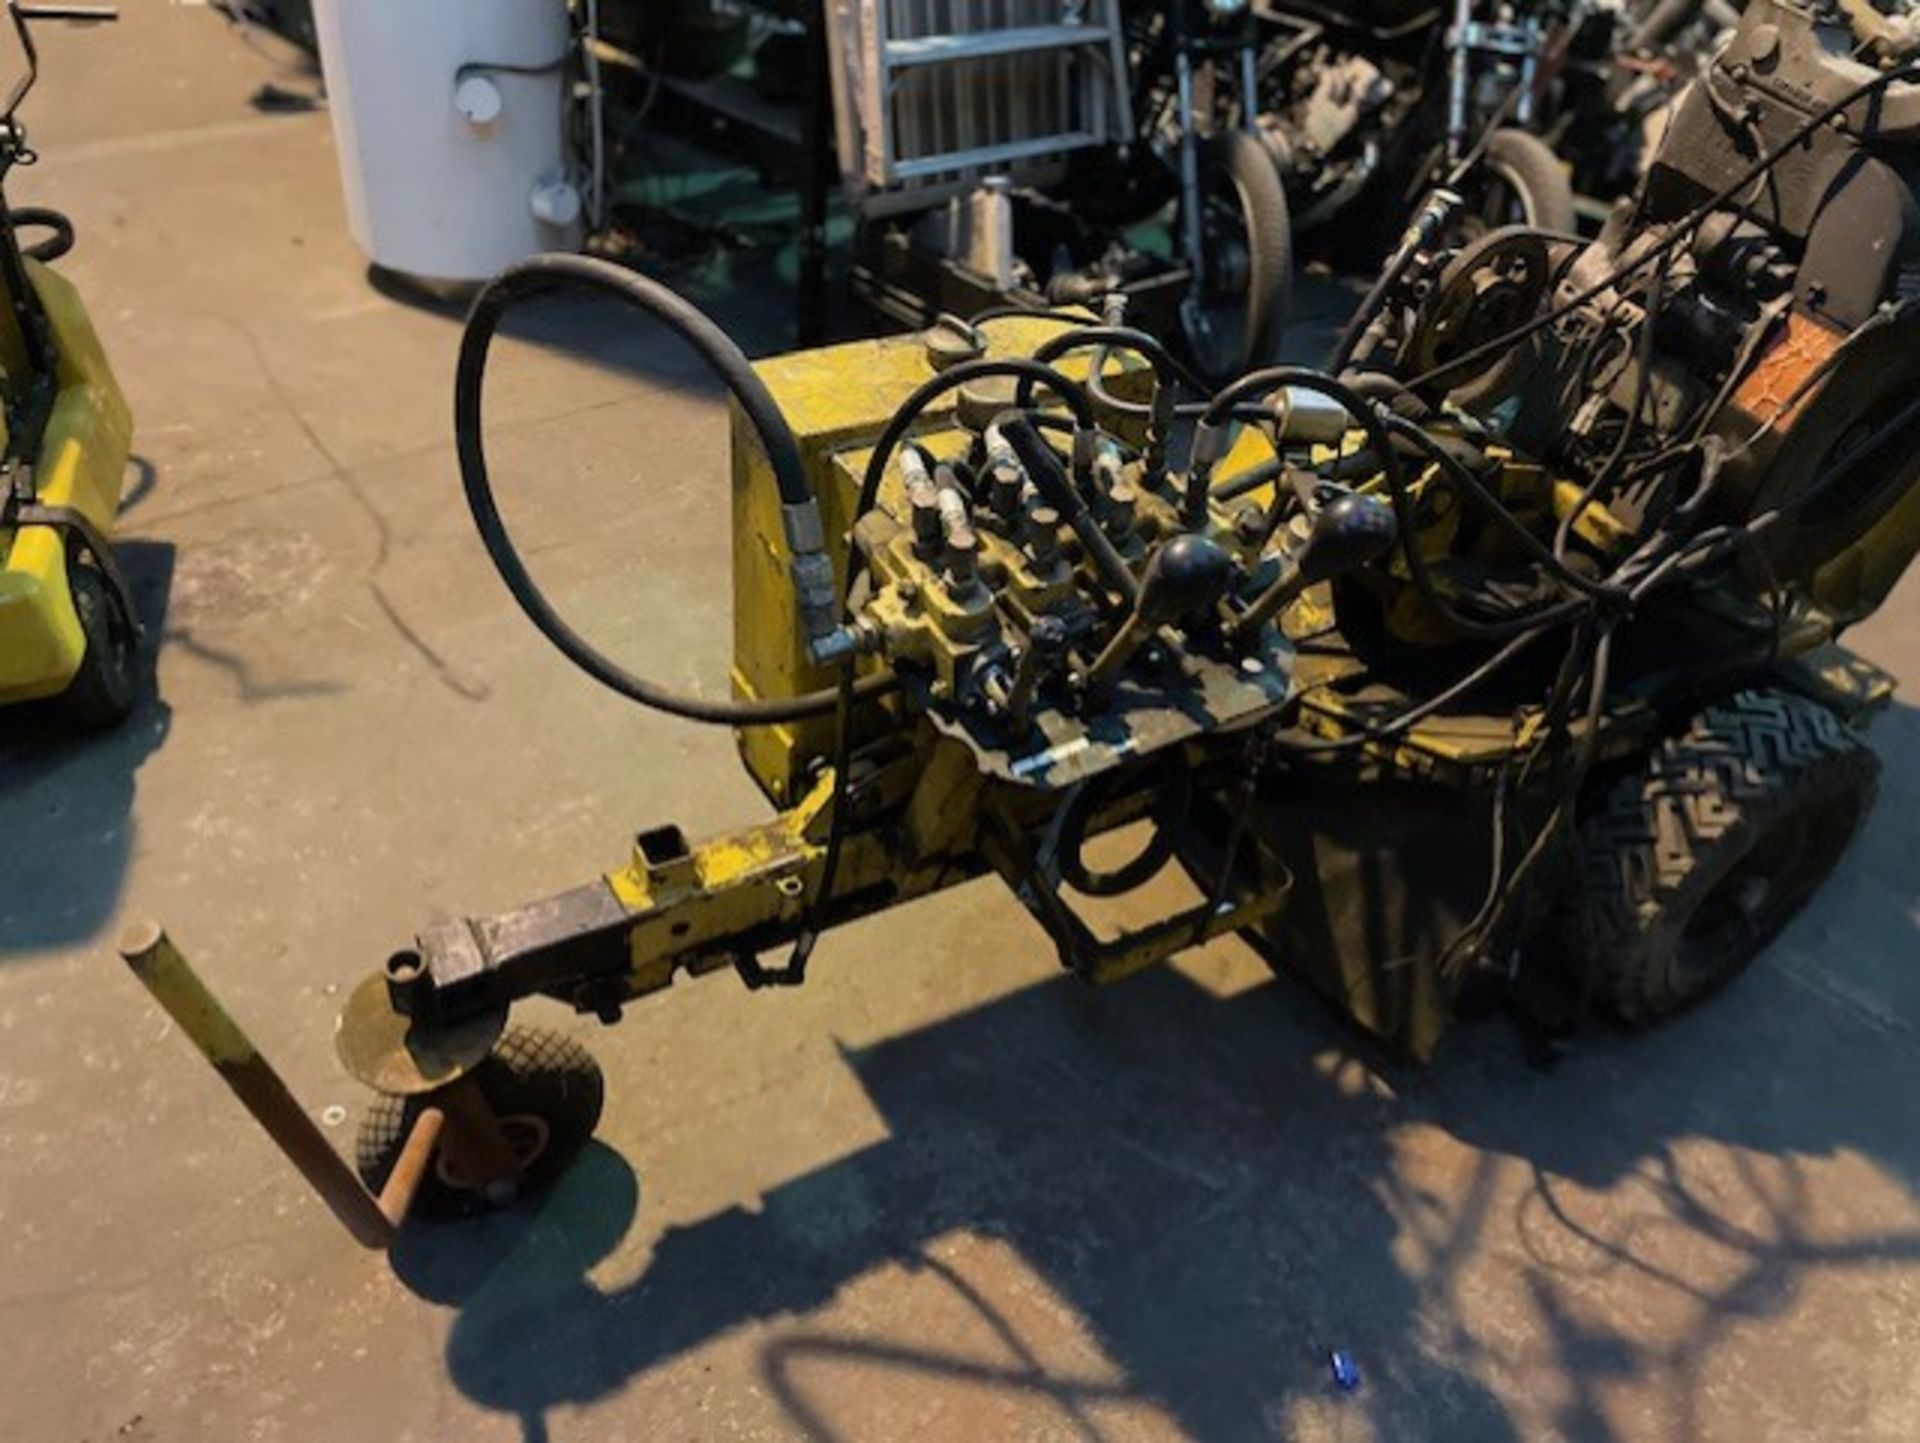 Stump grinder rayco 1620 with a diesel engine al together from belts to frame rare machine locking - Image 7 of 7